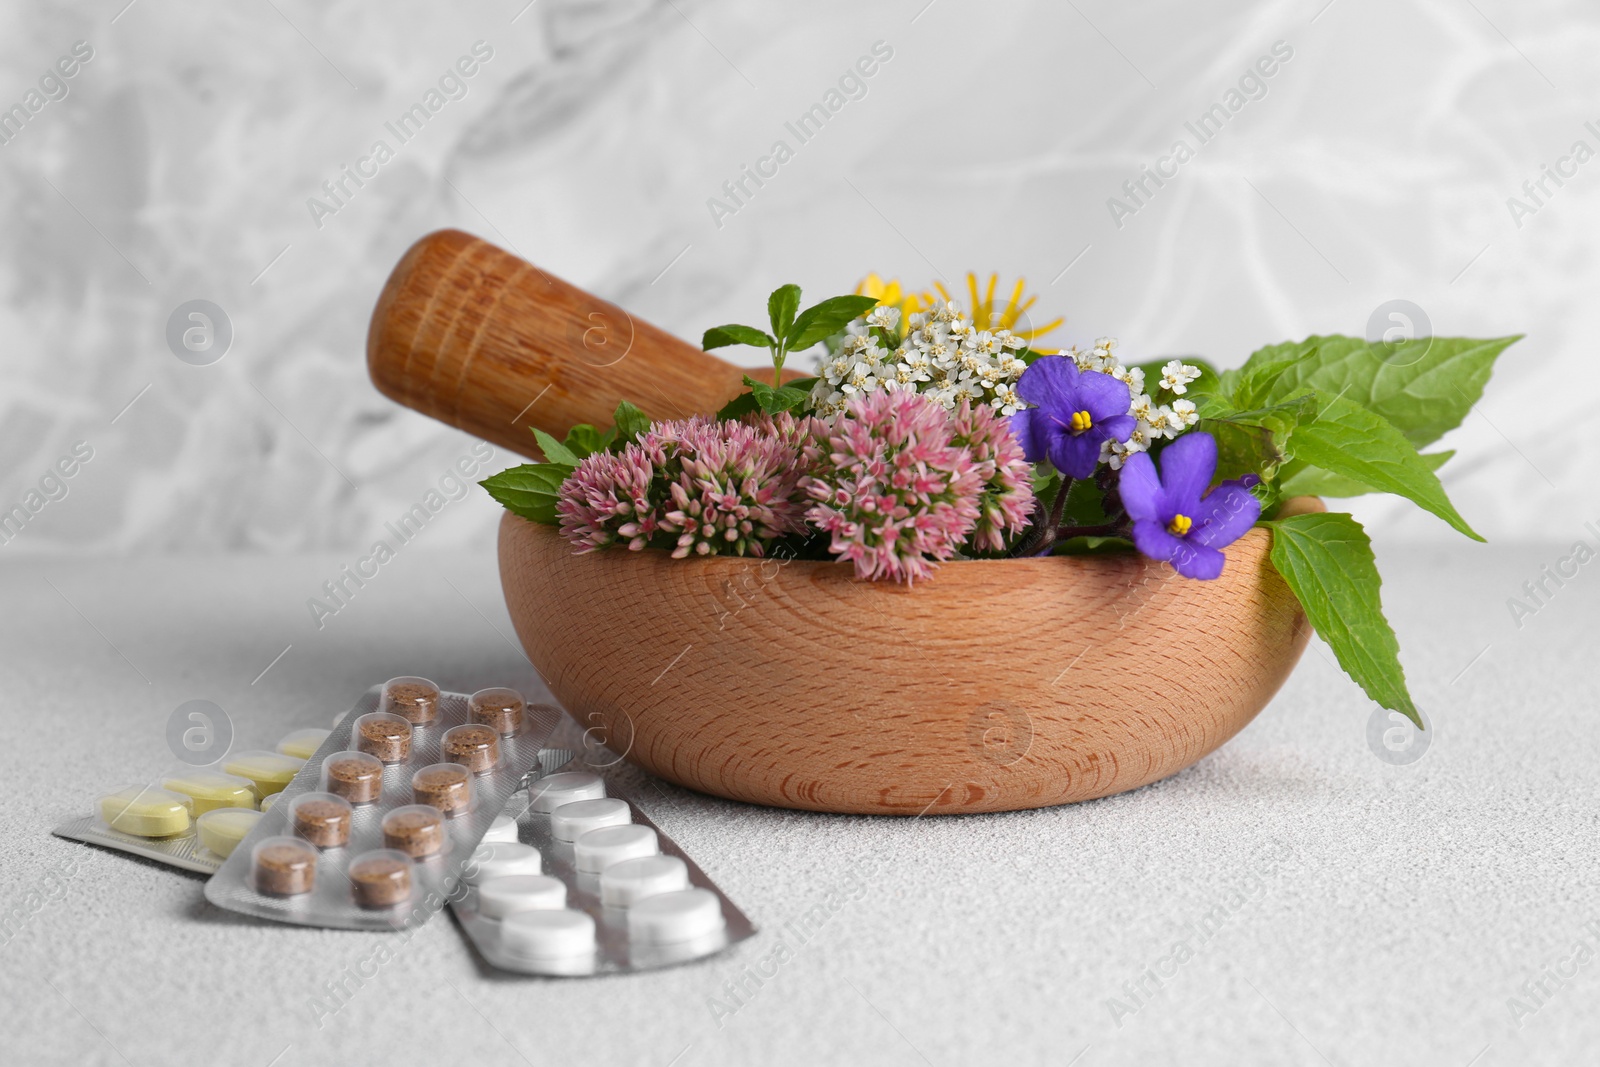 Photo of Wooden mortar with fresh herbs, flowers and pills on white table